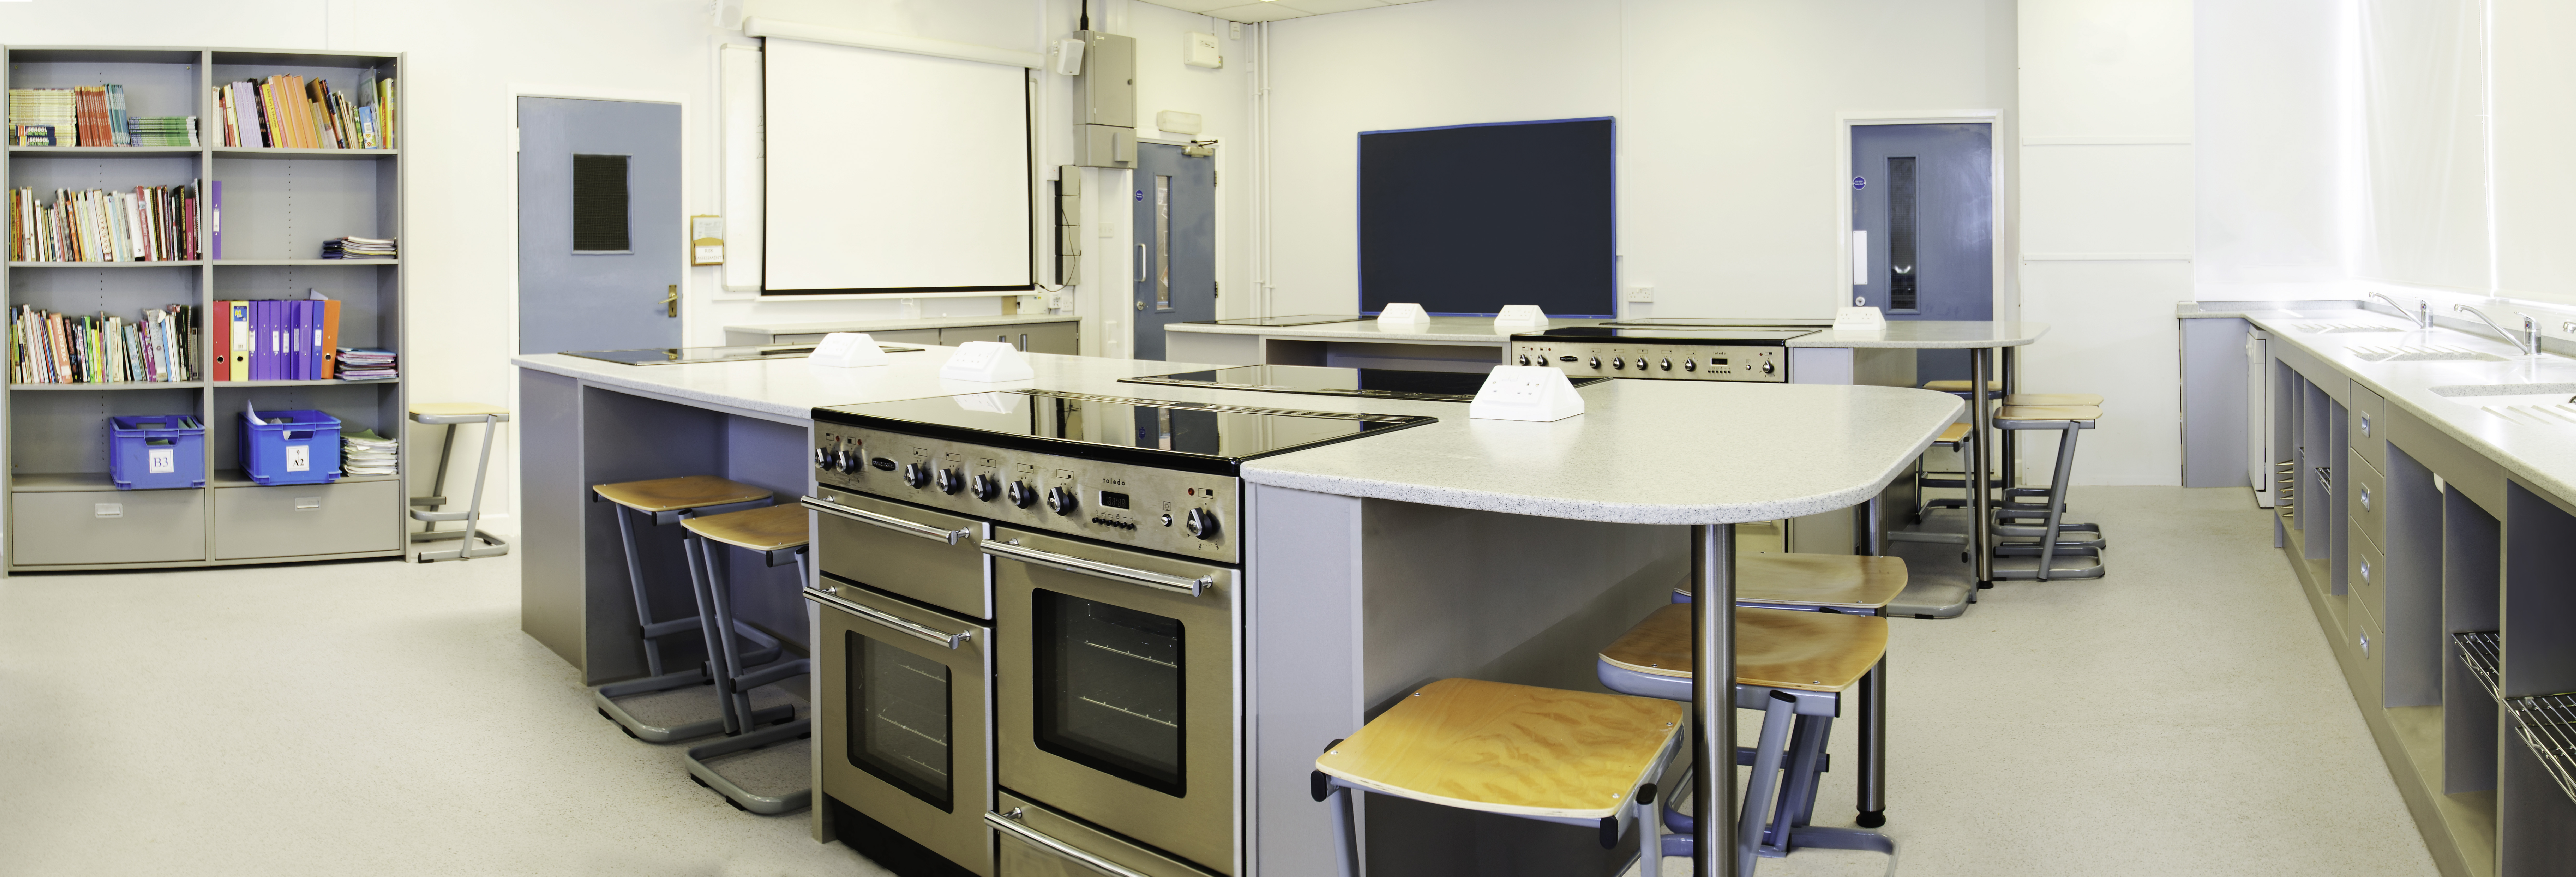 Southam College - Food Technology classroom